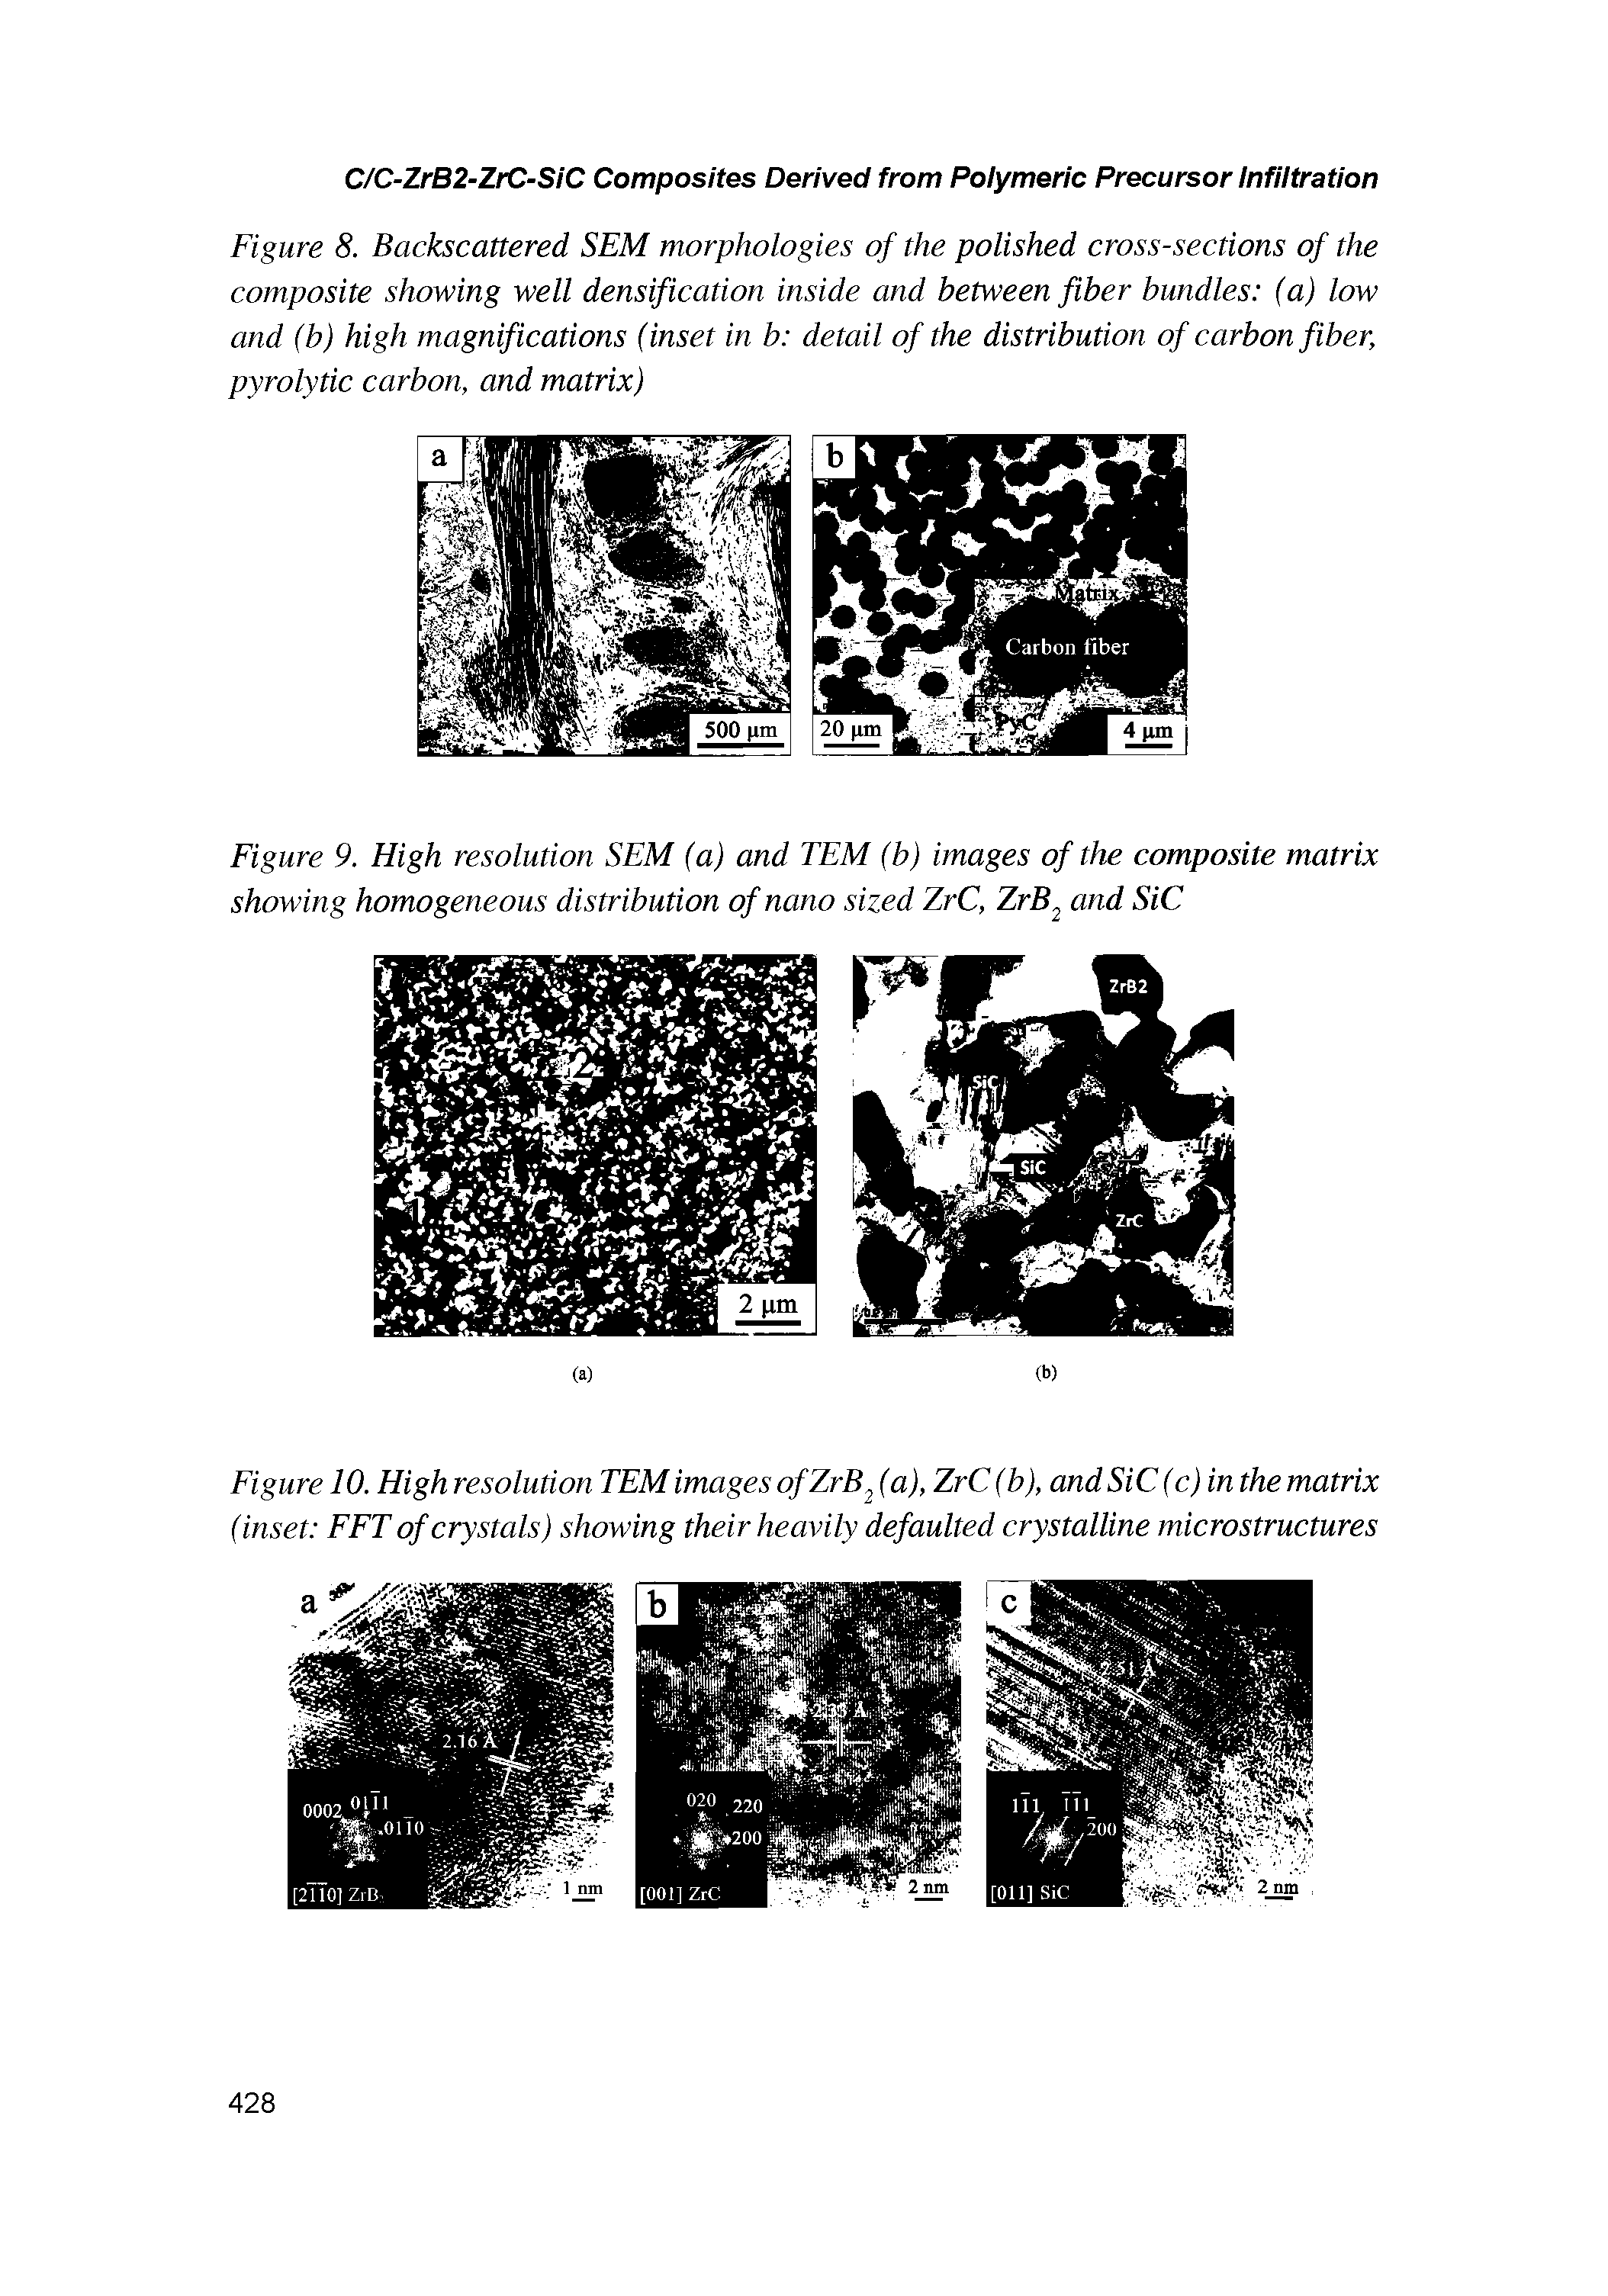 Figure 8. Backscattered SEM morphologies of the polished cross-sections of the composite showing well densification inside and between fiber bundles (a) low and (b) high magnifications (inset in b detail of the distribution of carbon fiber, pyrolytic carbon, and matrix)...